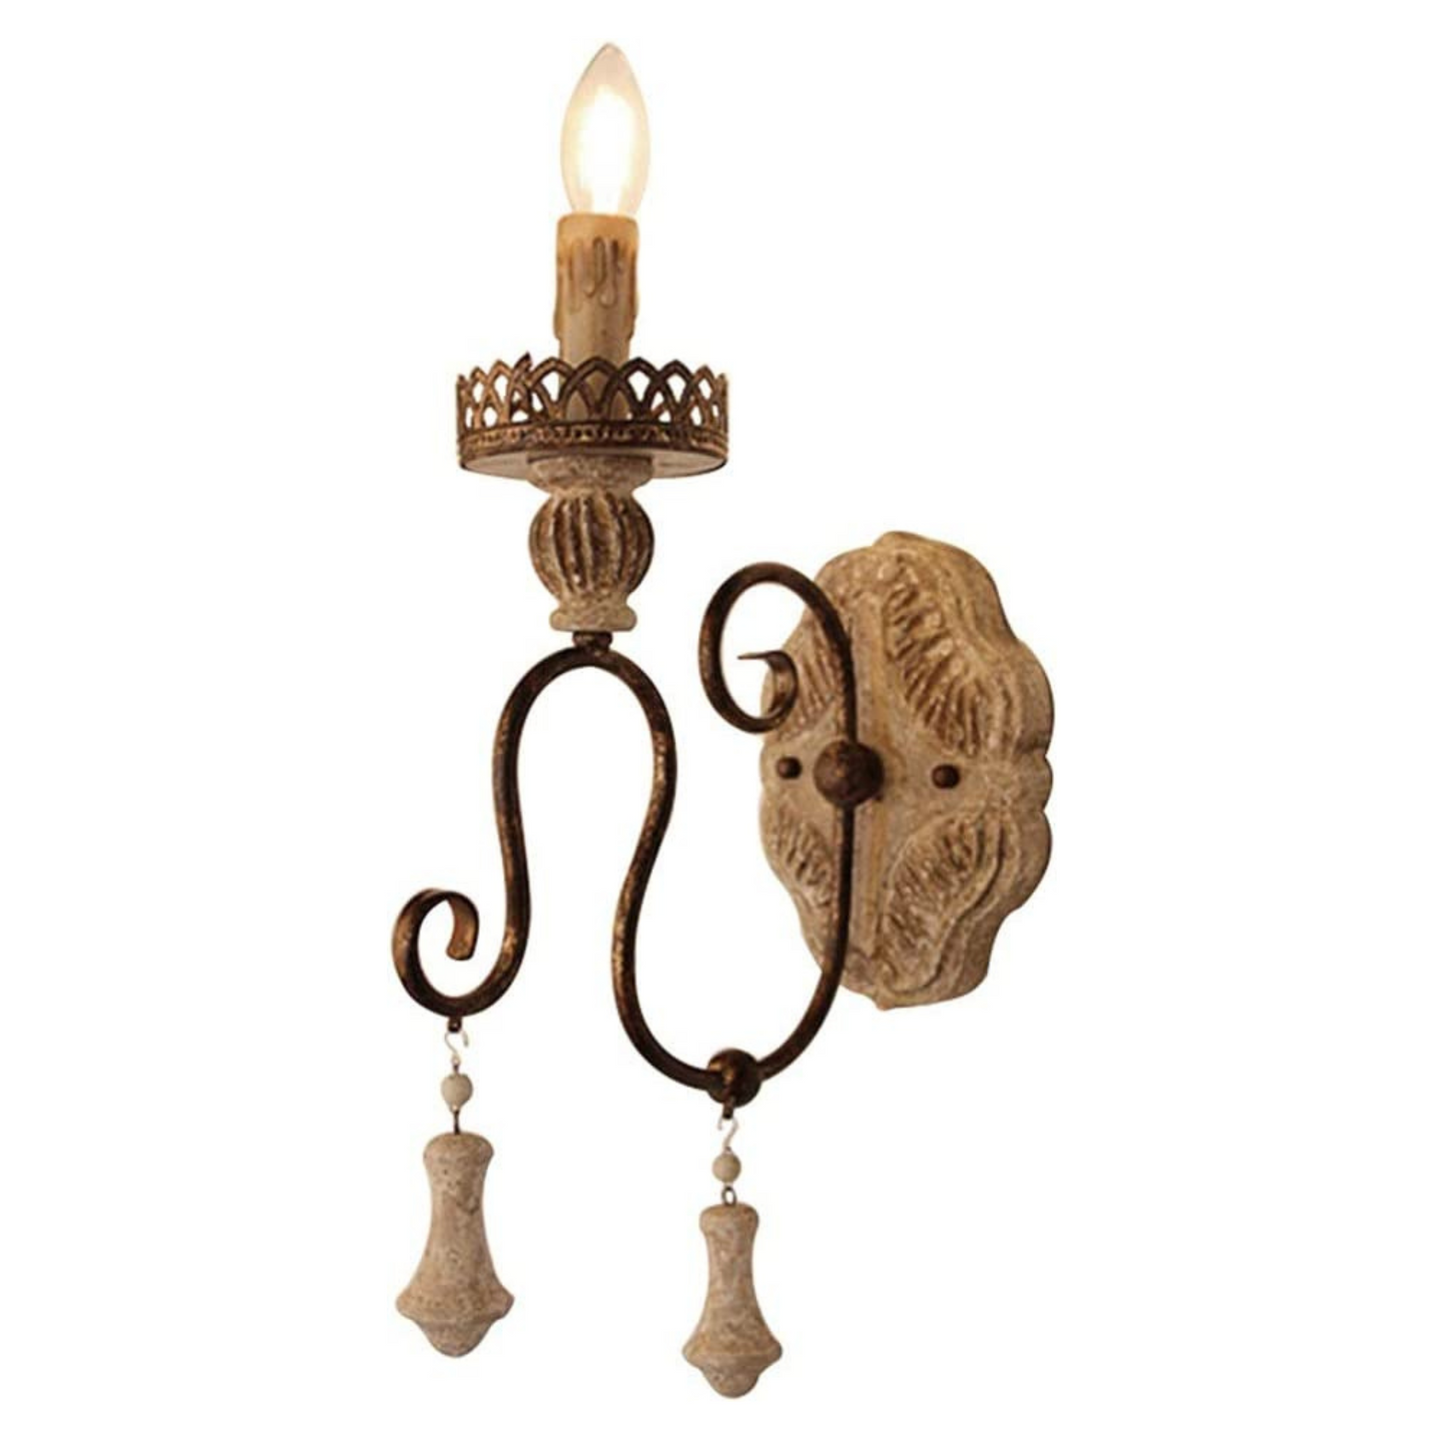 Antique Iron Wall Lamp by Gloss (9329/1)